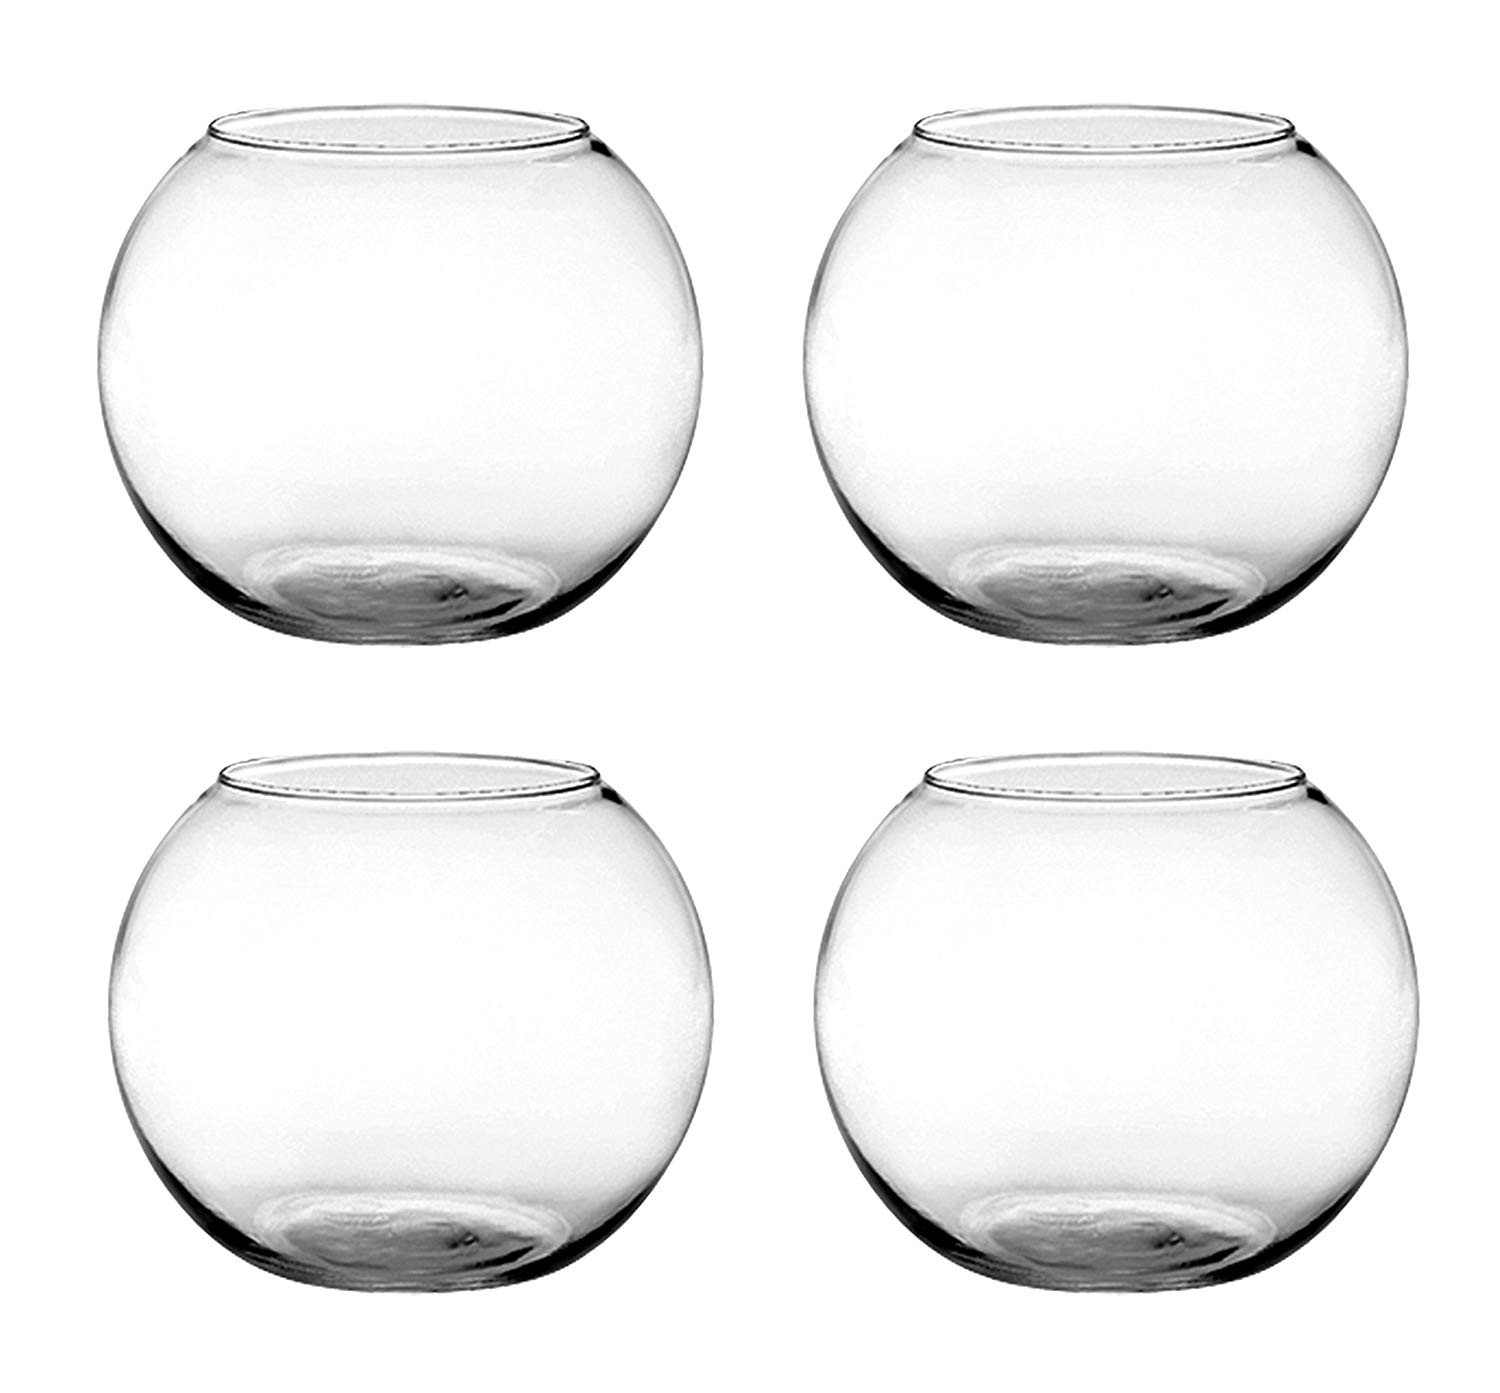 28 Trendy 20 Inch Cylinder Vases 2024 free download 20 inch cylinder vases of amazon com set of 4 syndicate sales 6 inches clear rose bowl intended for amazon com set of 4 syndicate sales 6 inches clear rose bowl bundled by maven gifts garden